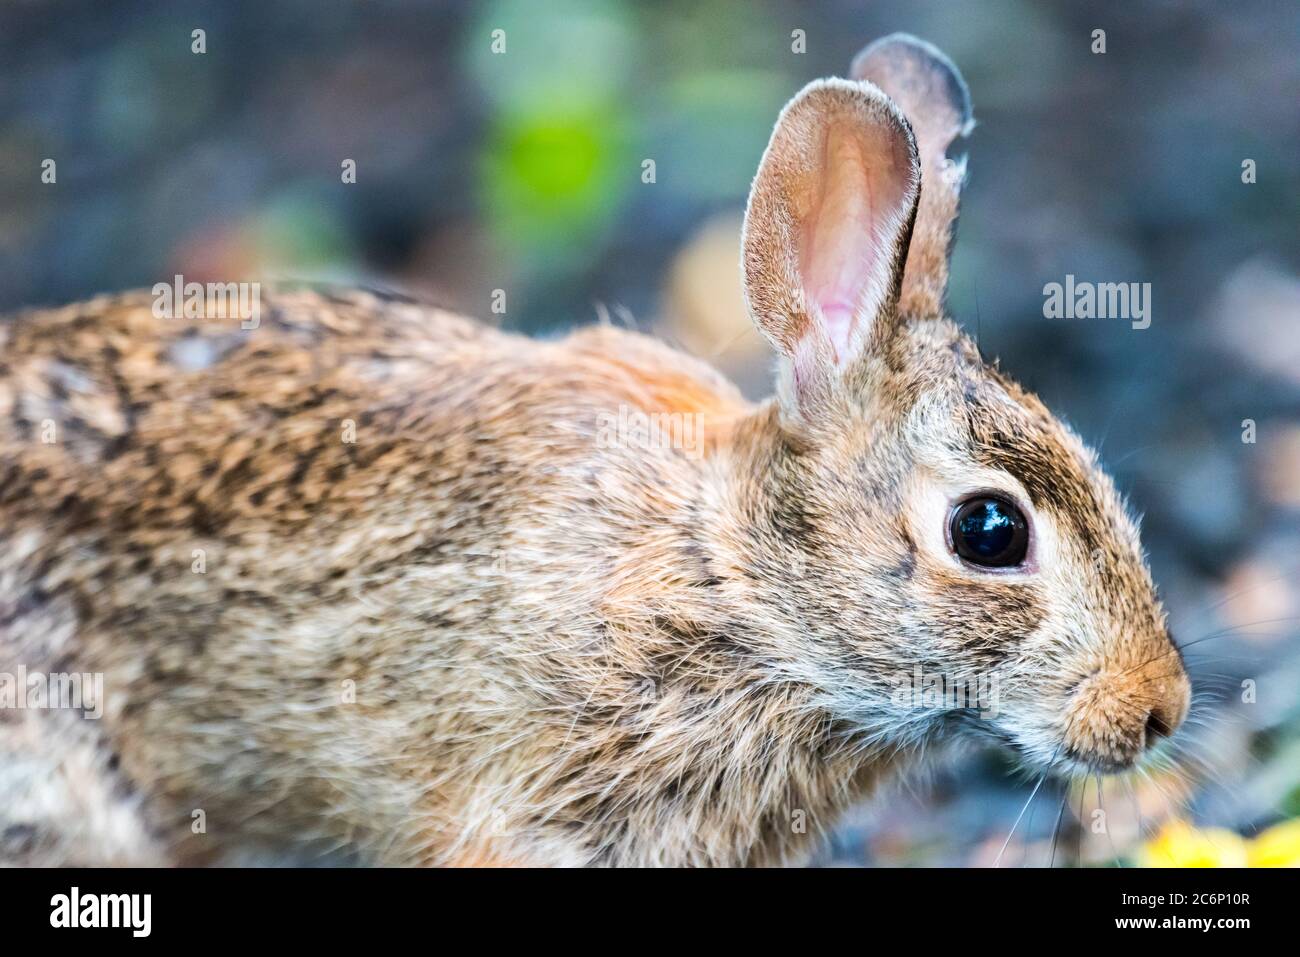 New England Cottontail foraging for food in the neighborhood. Stock Photo